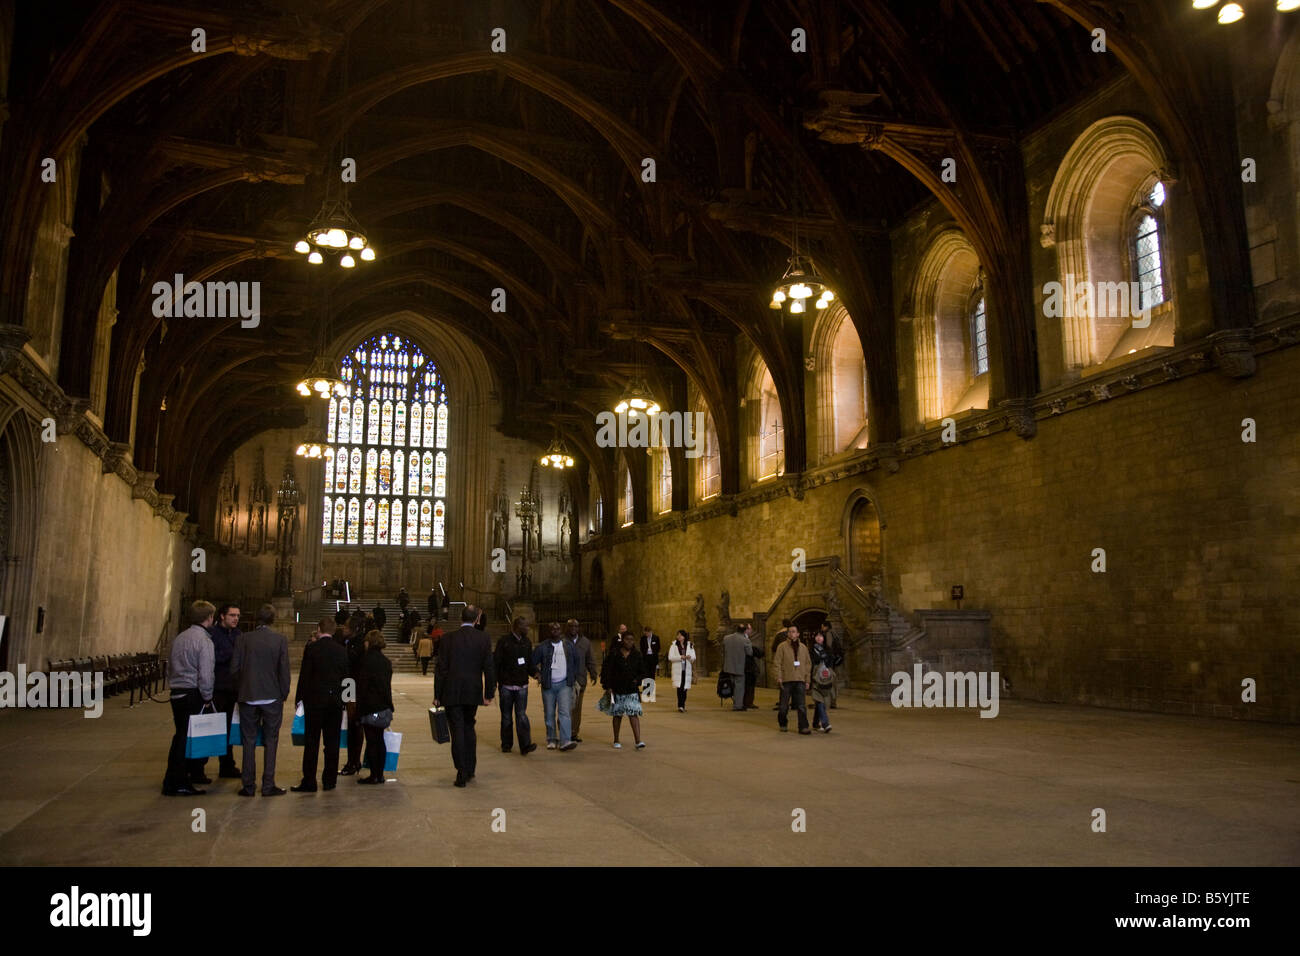 Hammer-beam roof of Westminster Hall, Houses of Parliament, Westminster. London UK. (44) Stock Photo